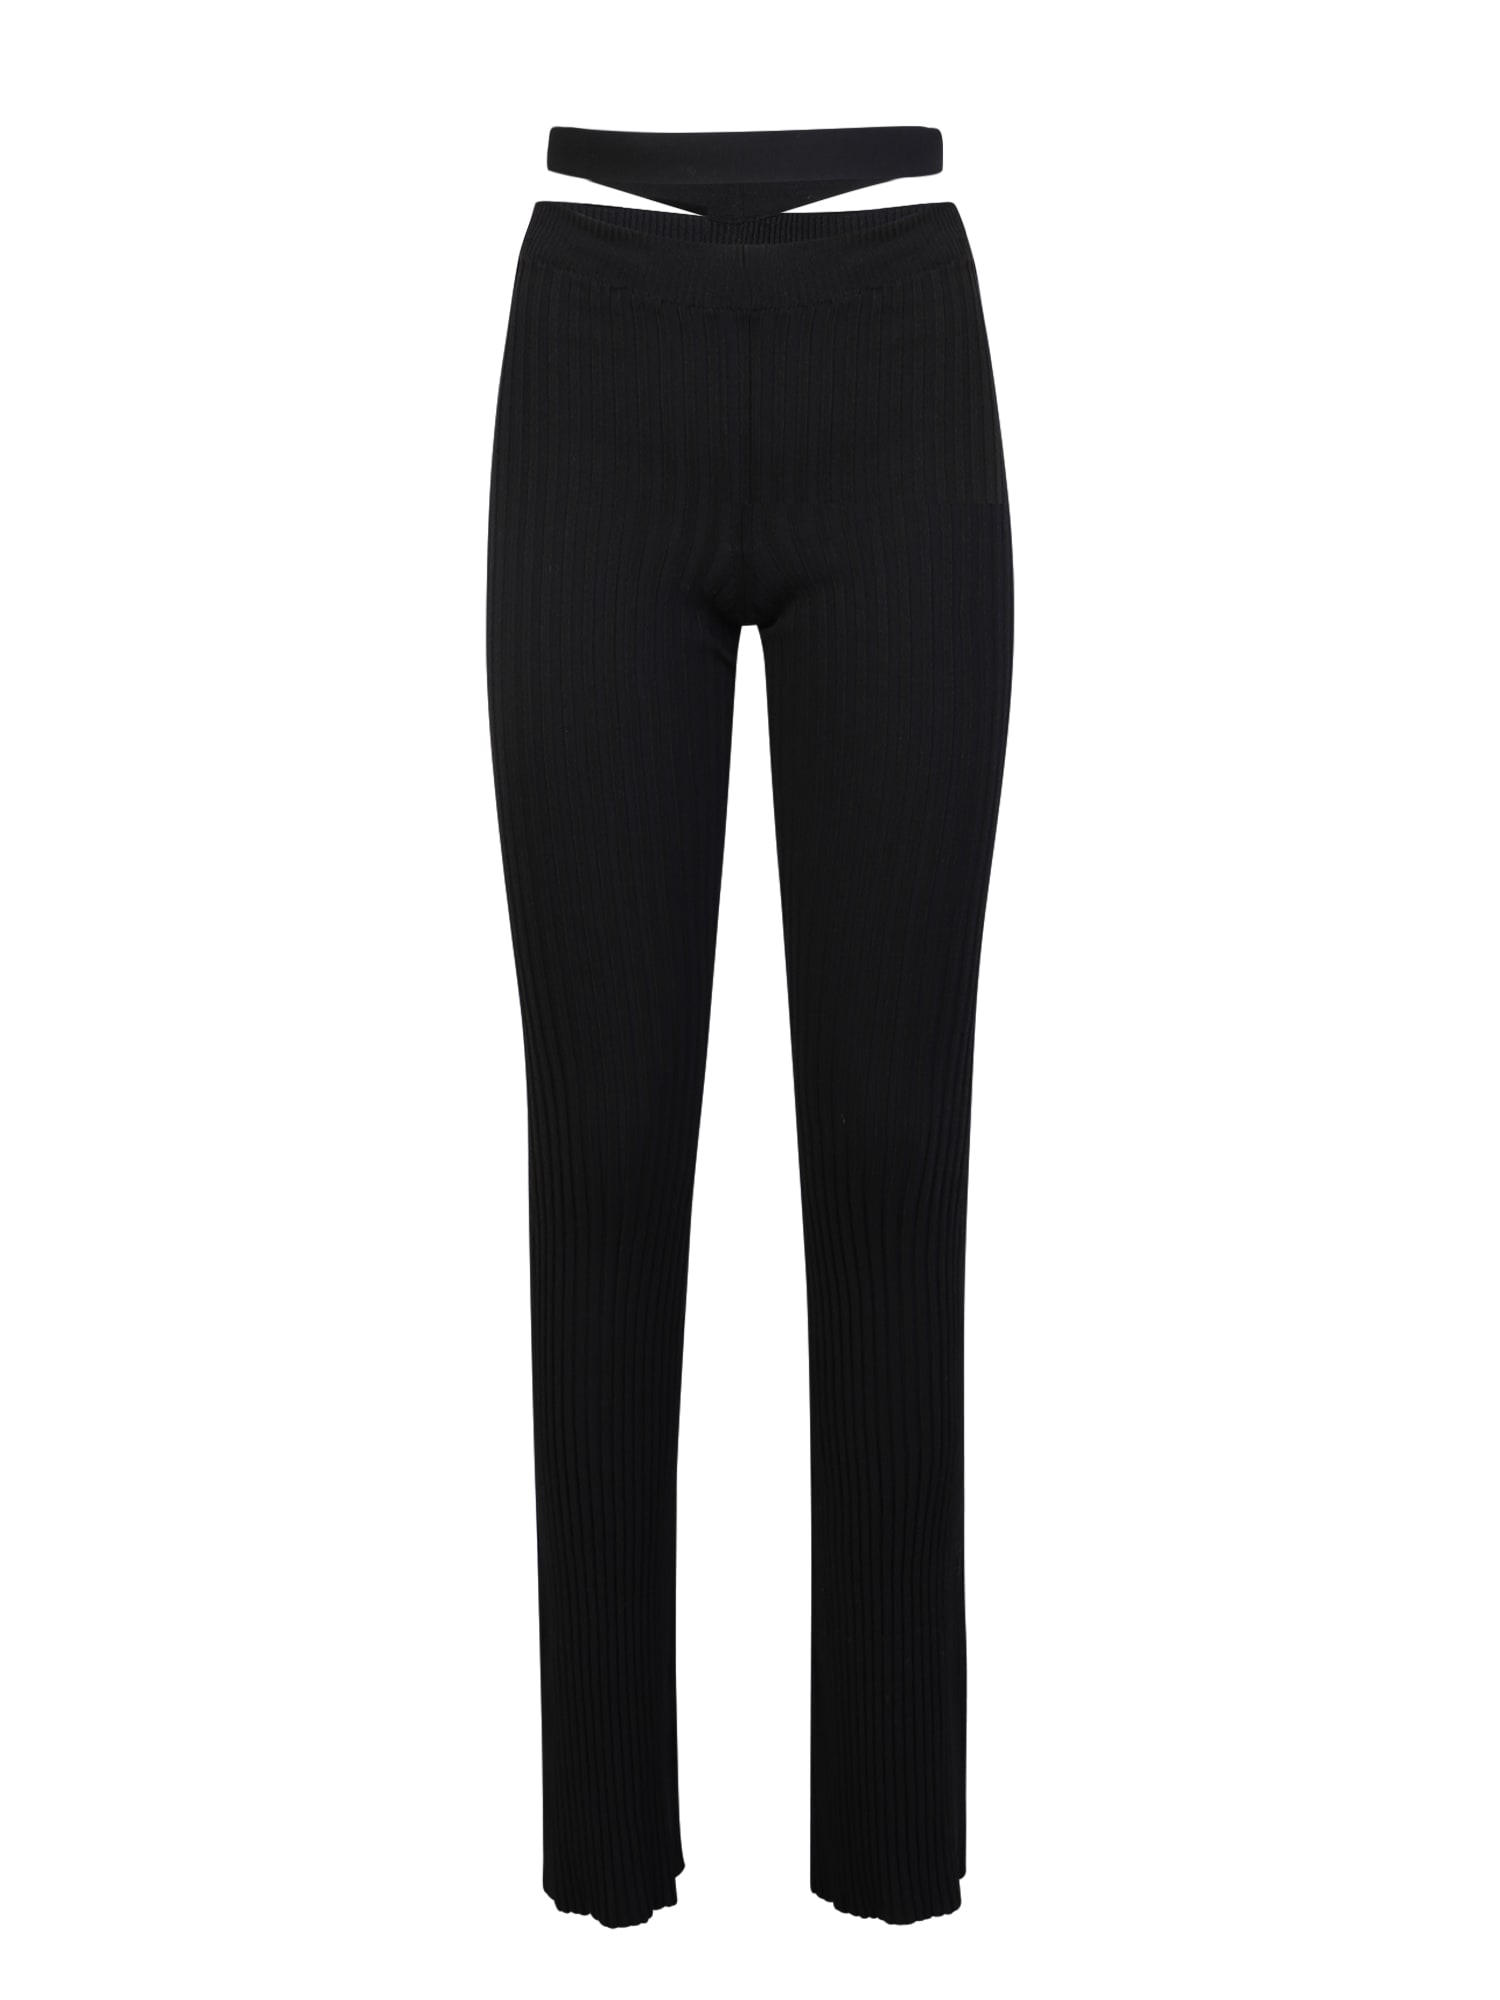 ANDREADAMO Cut Out Detail Trousers